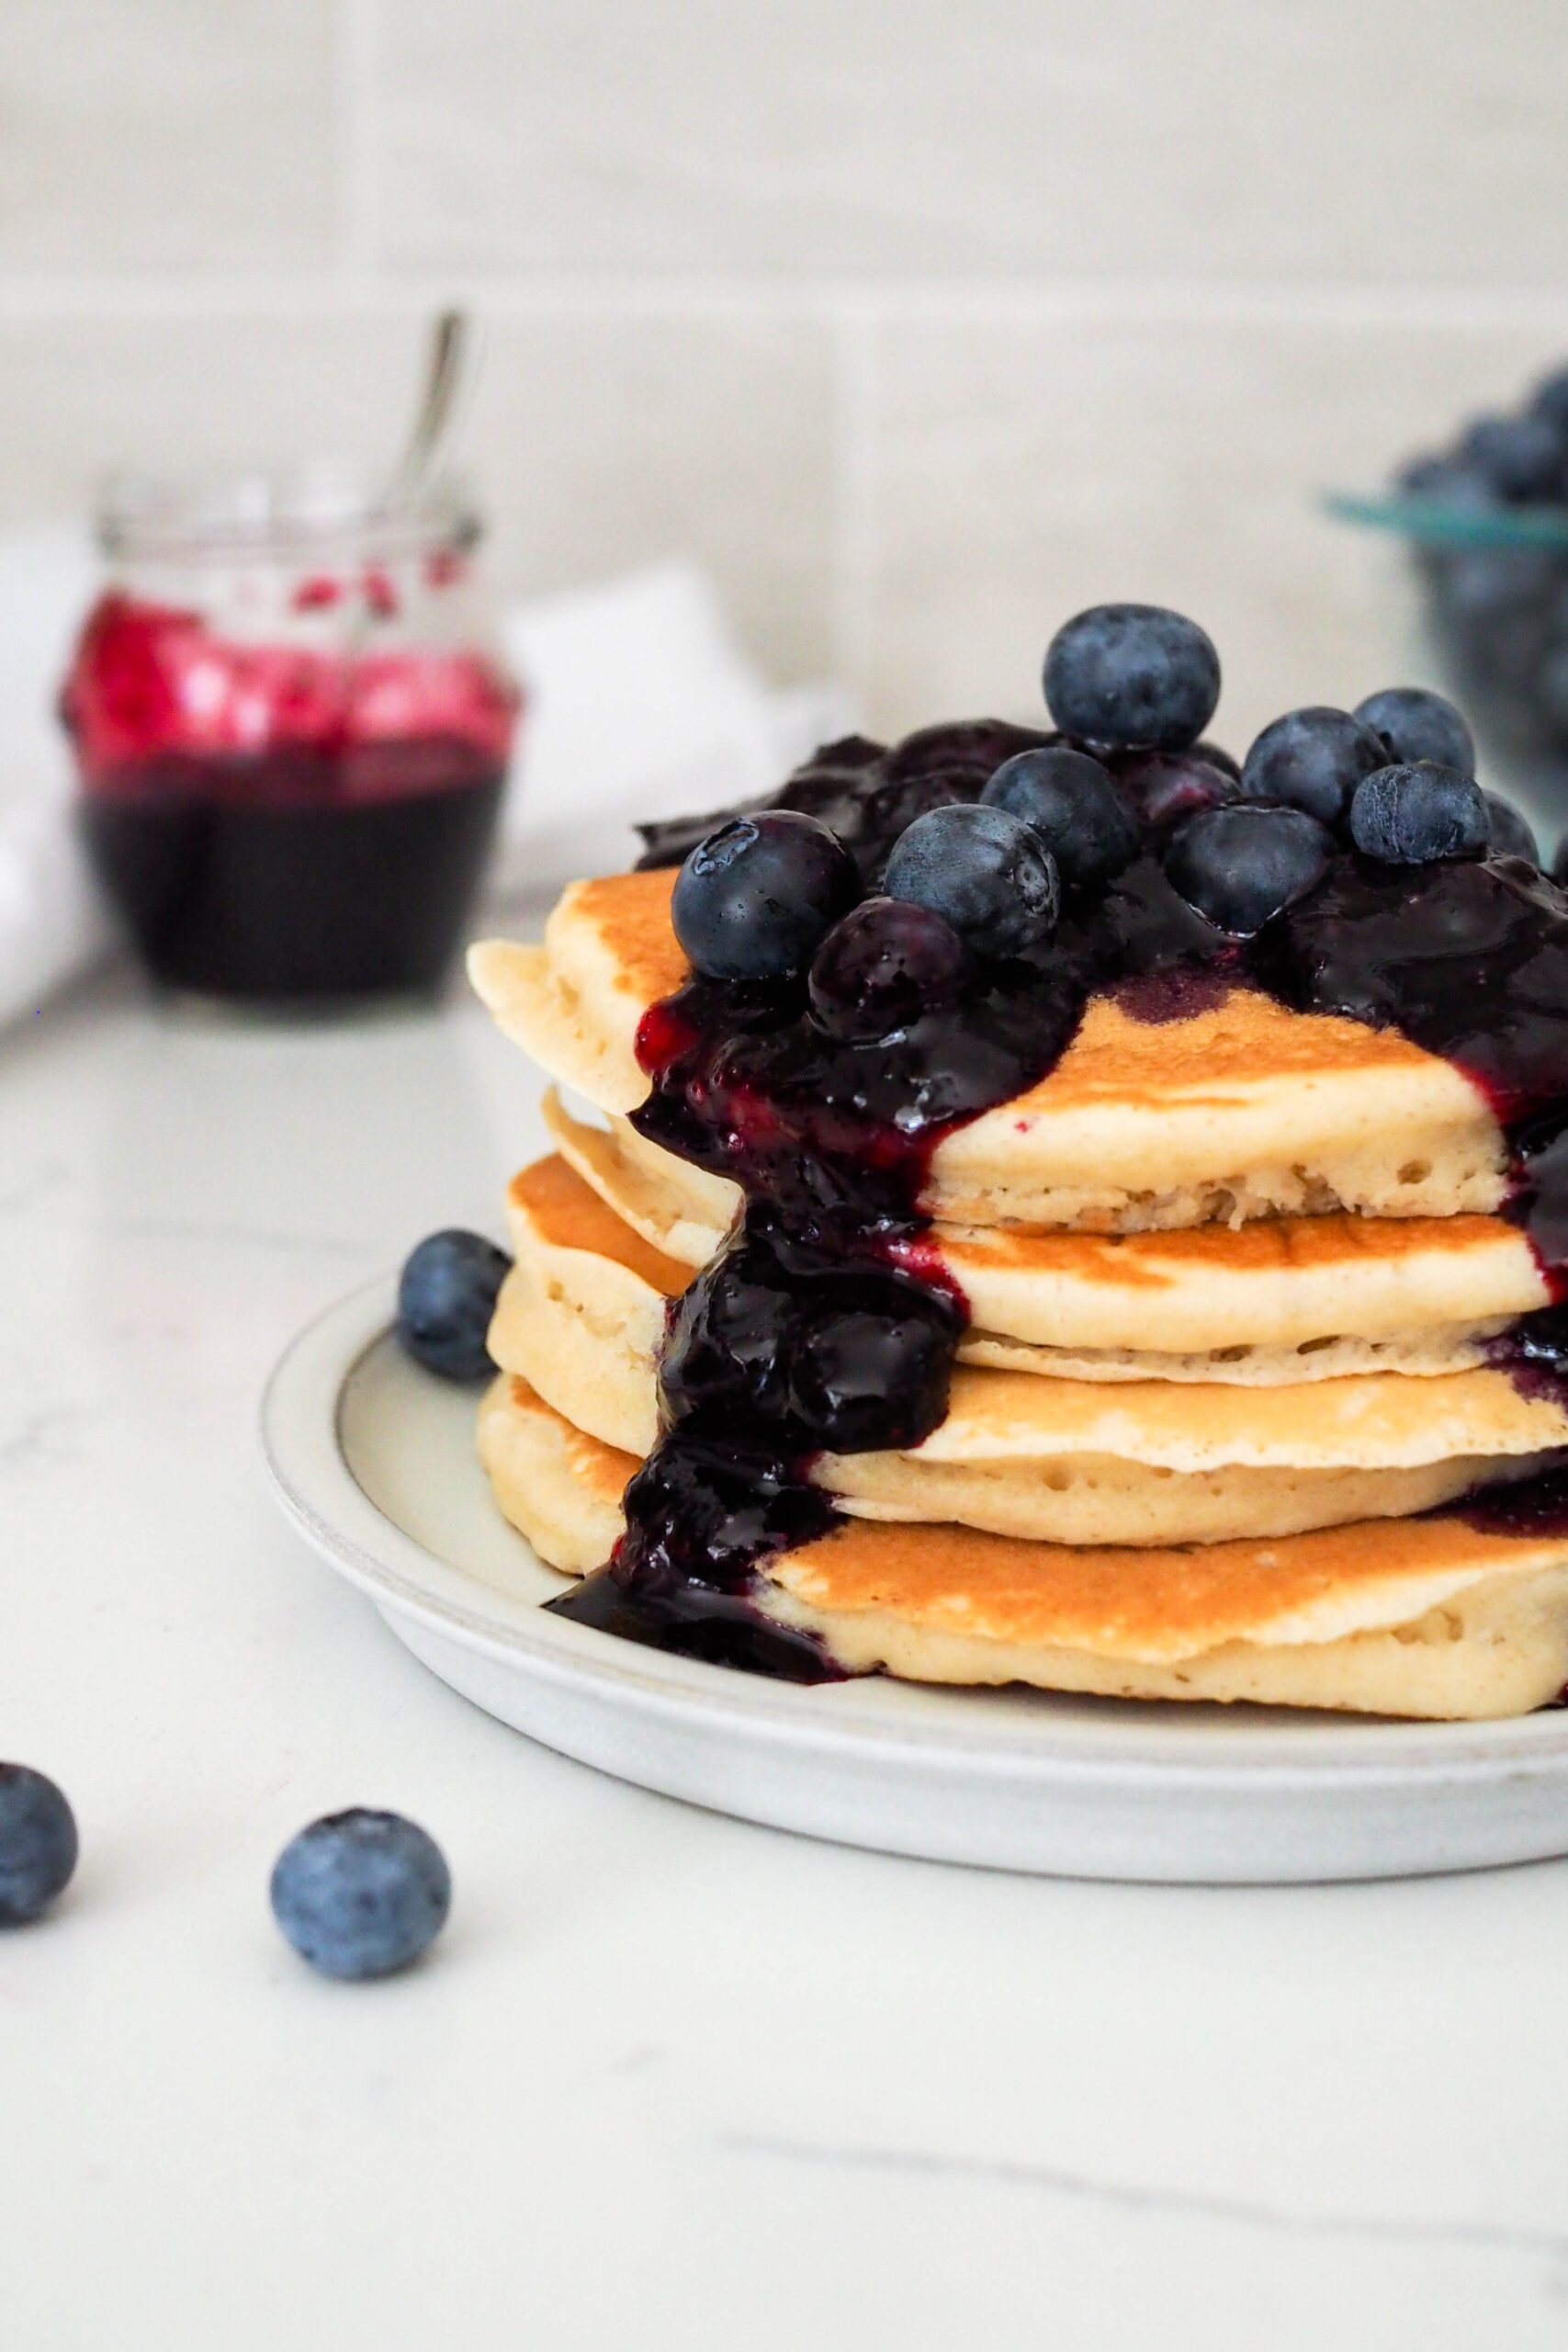 Chunky blueberry syrup drips down the side of a stack of pancakes.